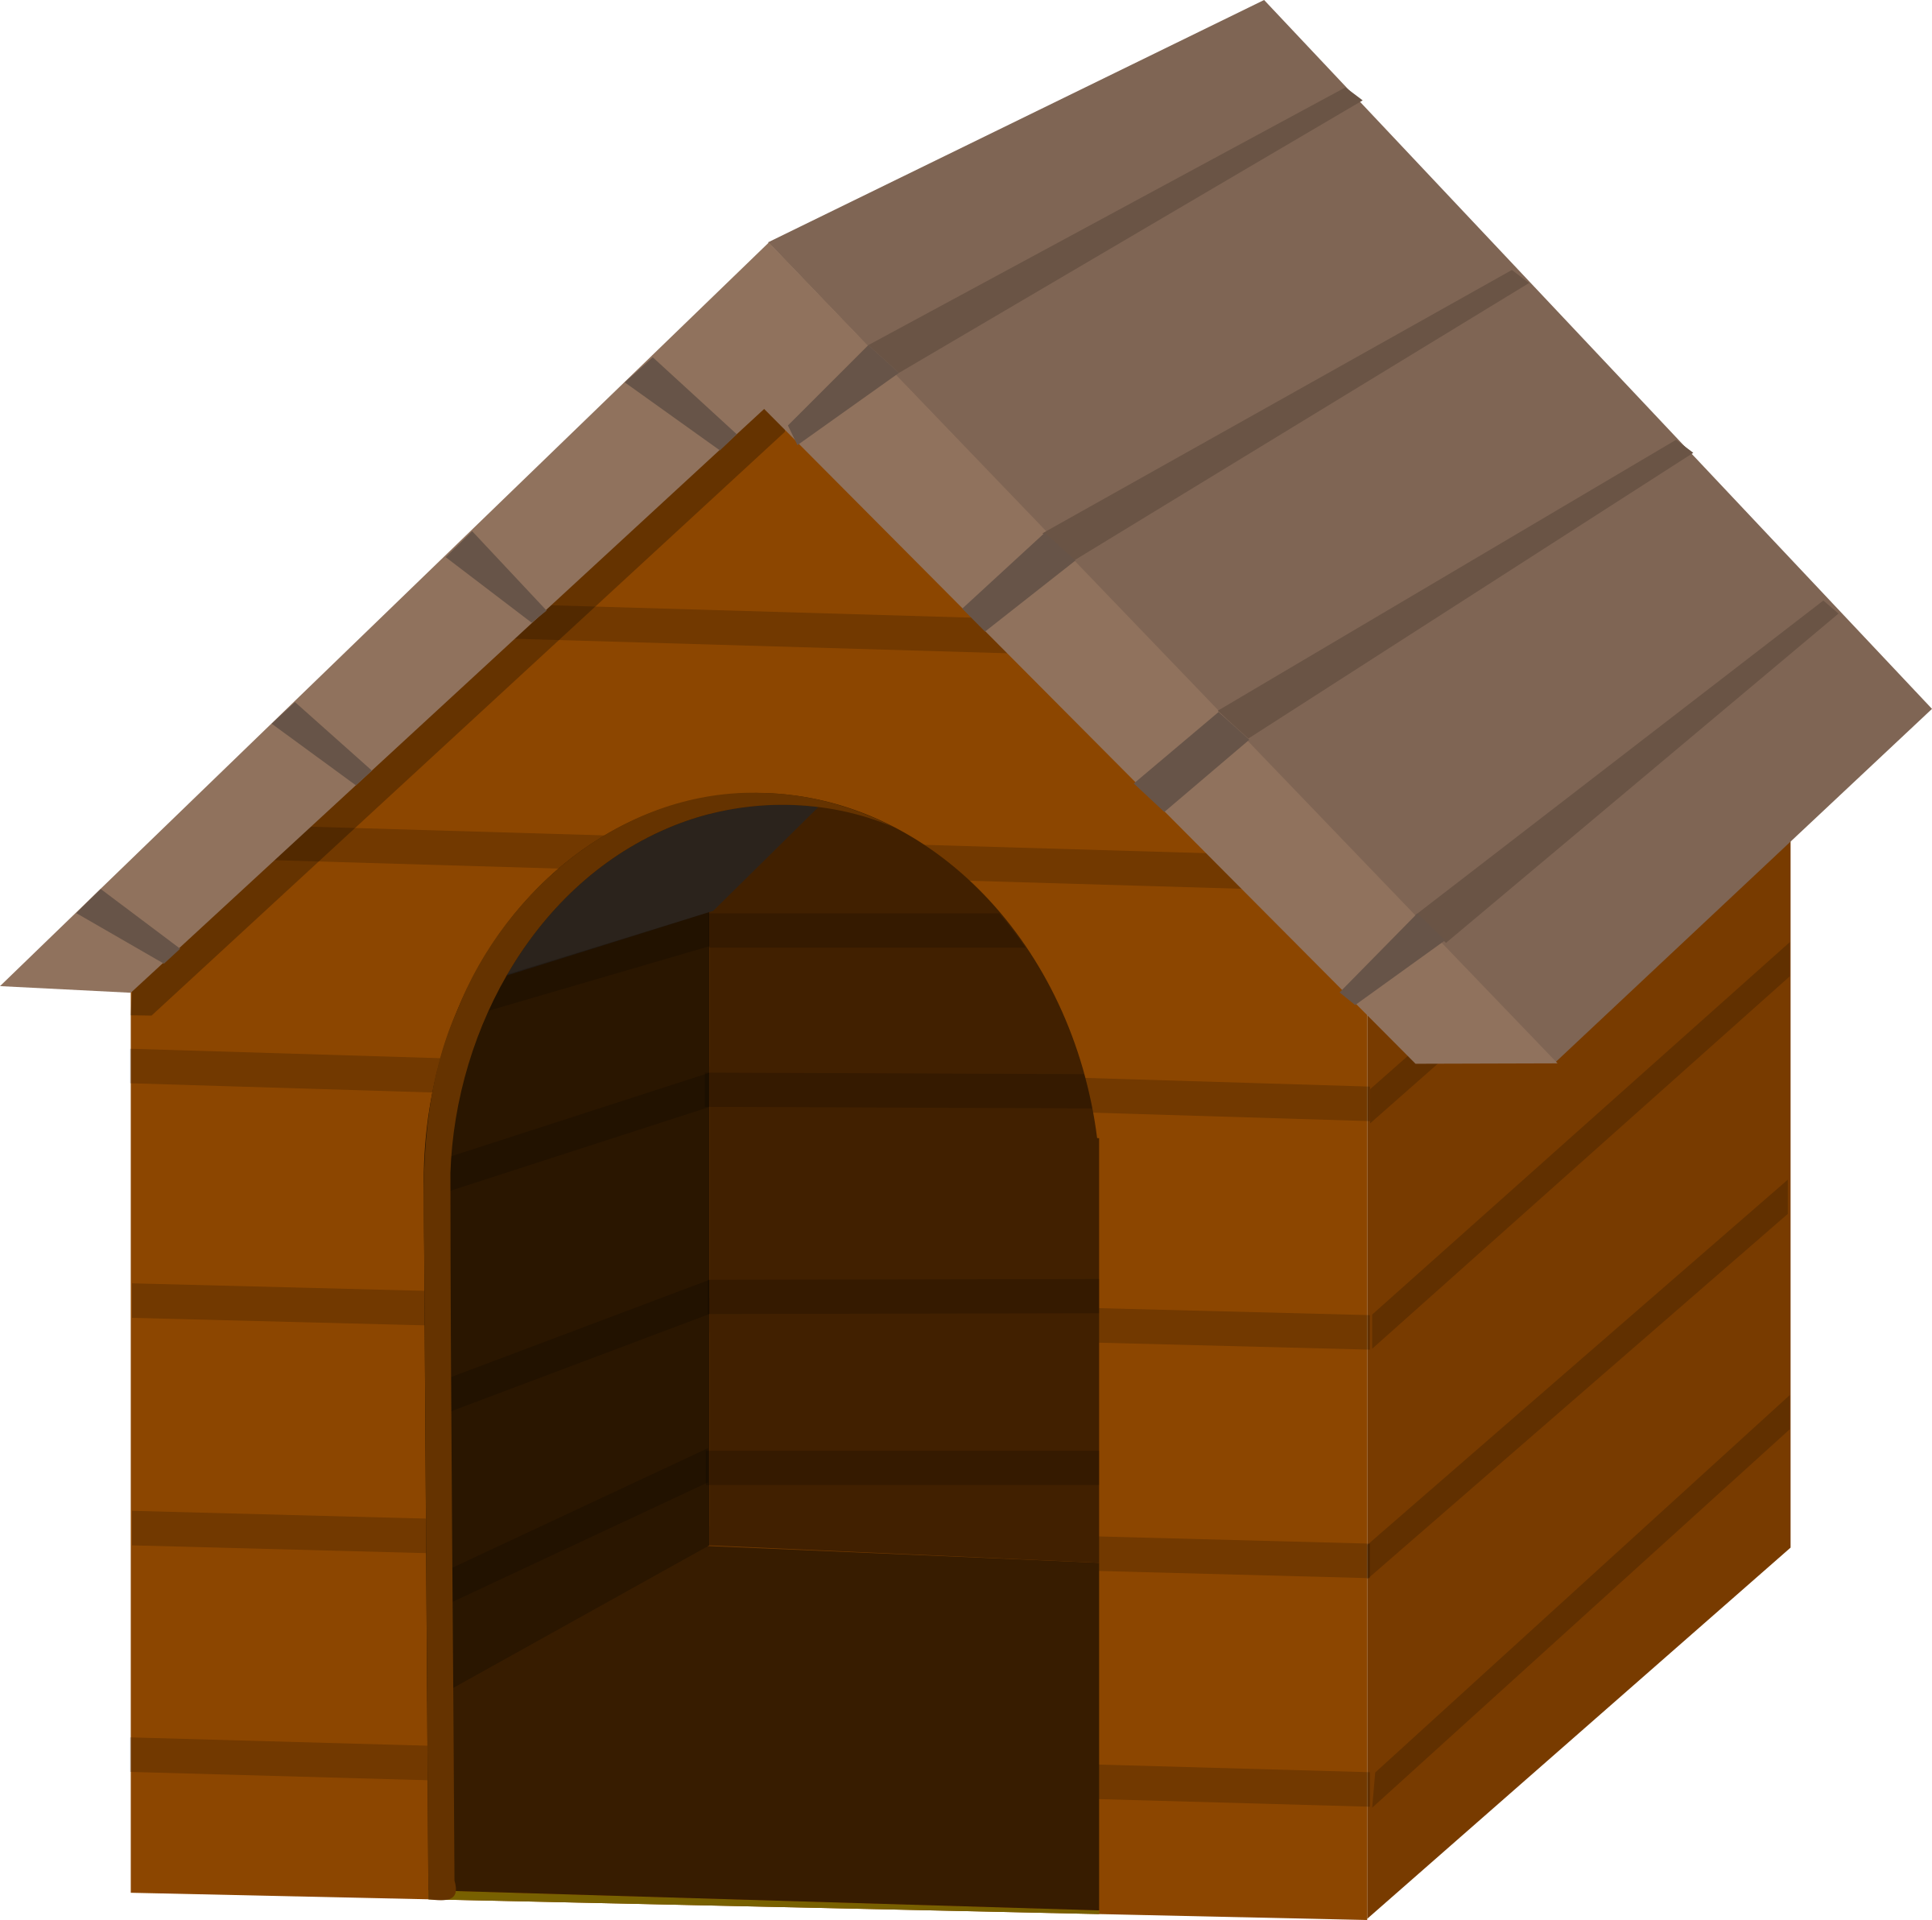 Doghouse Clipart Of Dog - Doghouse Png (2400x2385)